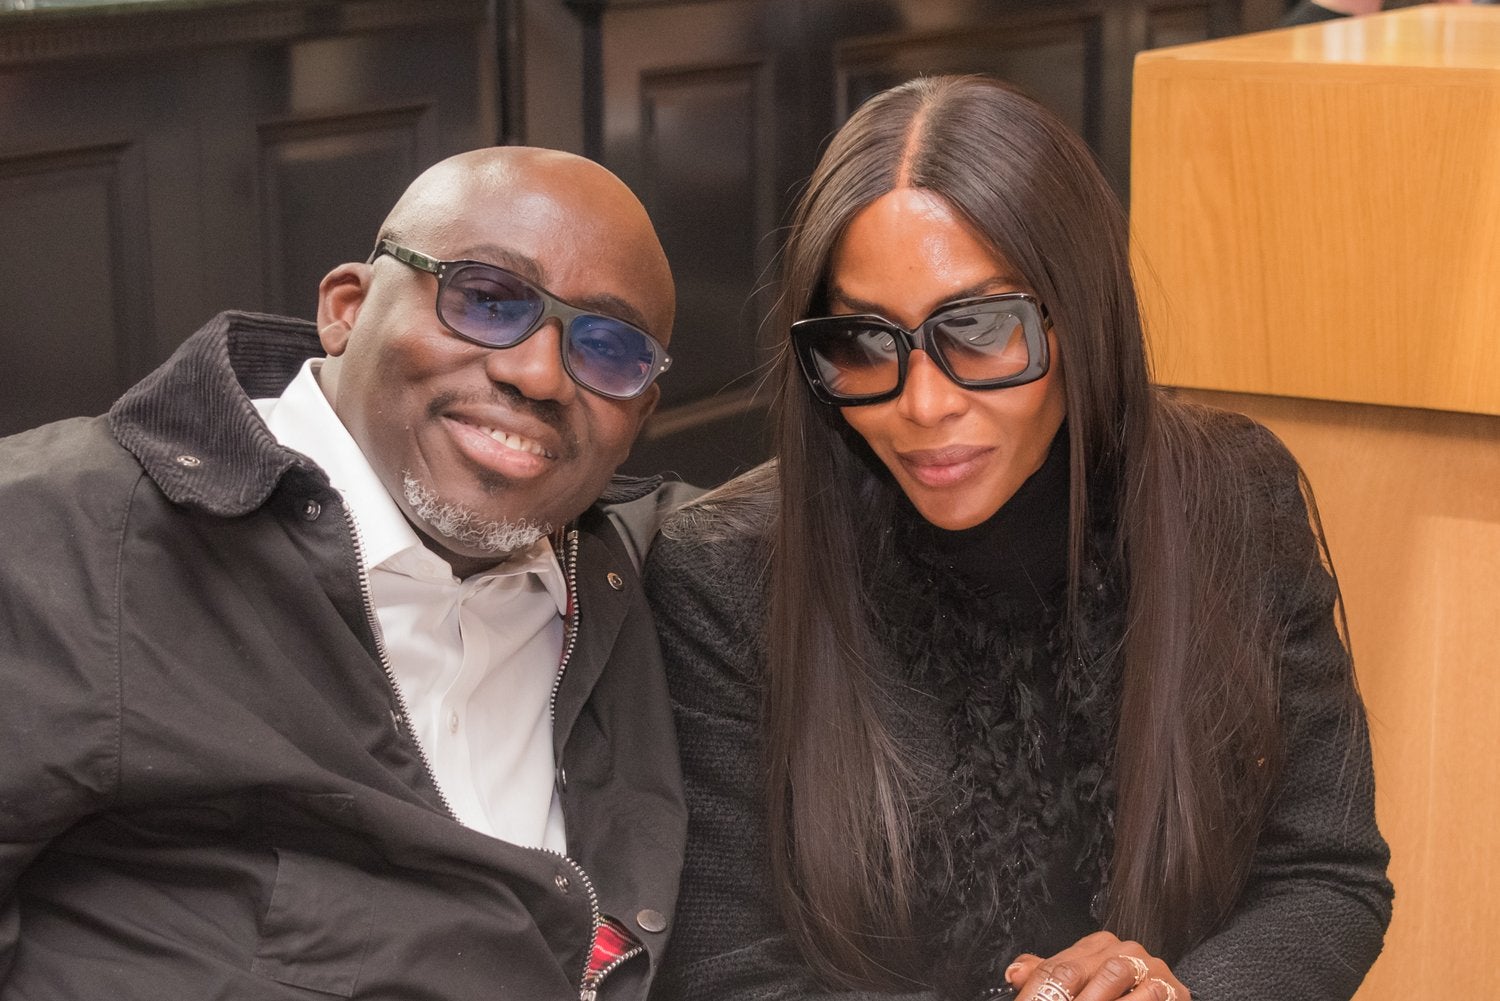 edward enninful: 'i was told diversity equals downmarket at condé nast. my vogue proved them wrong'